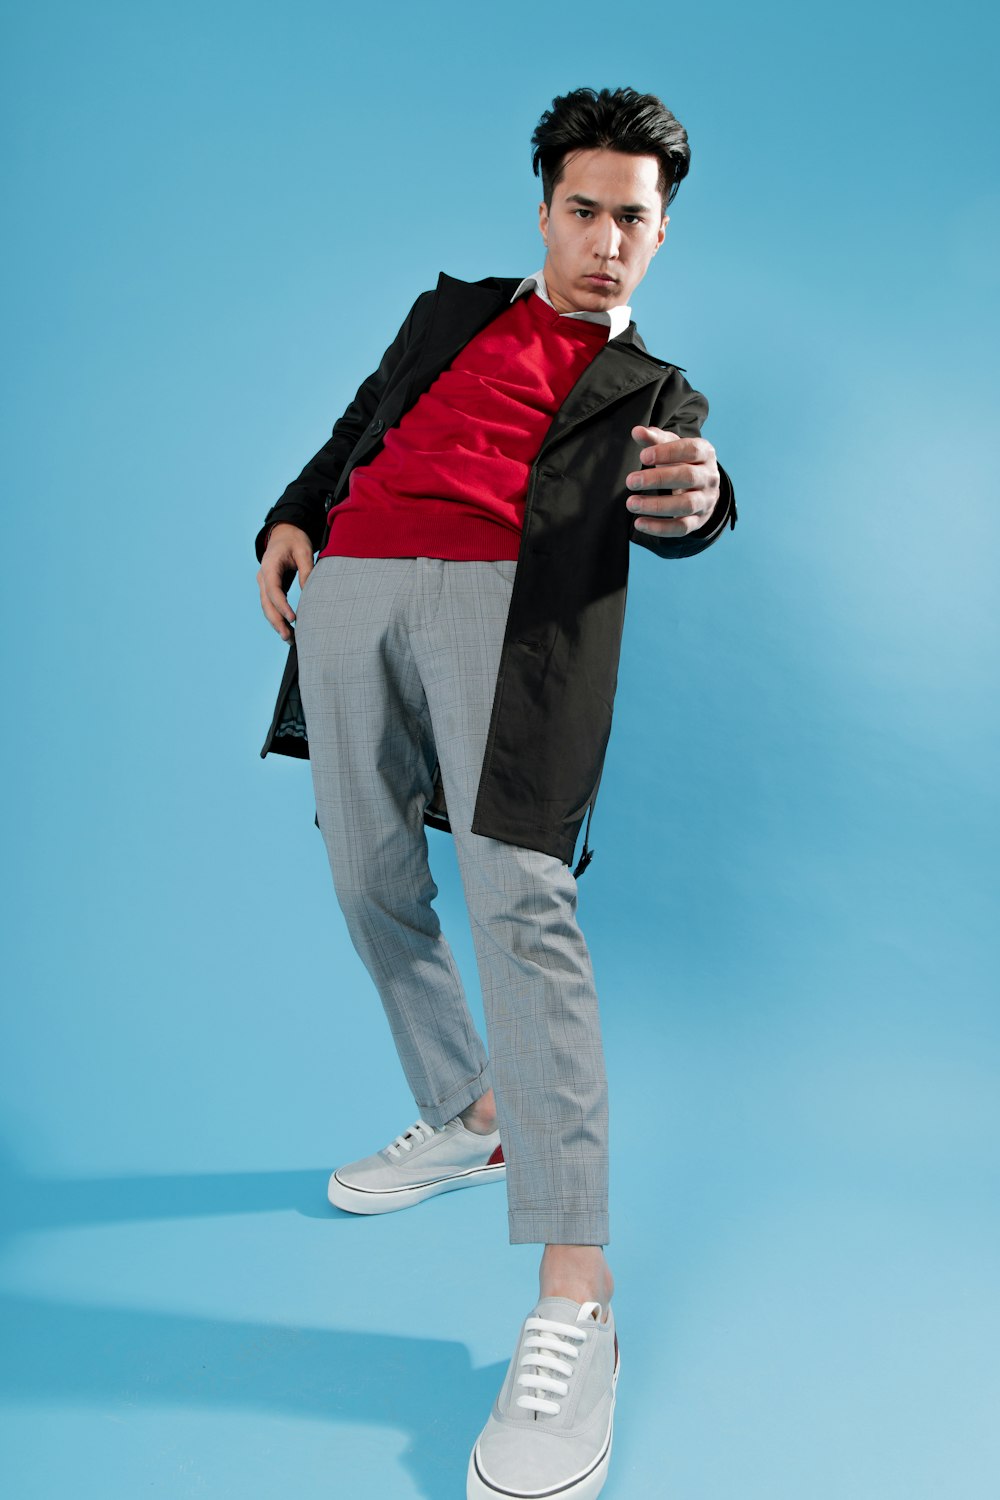 a man in a red shirt and grey pants